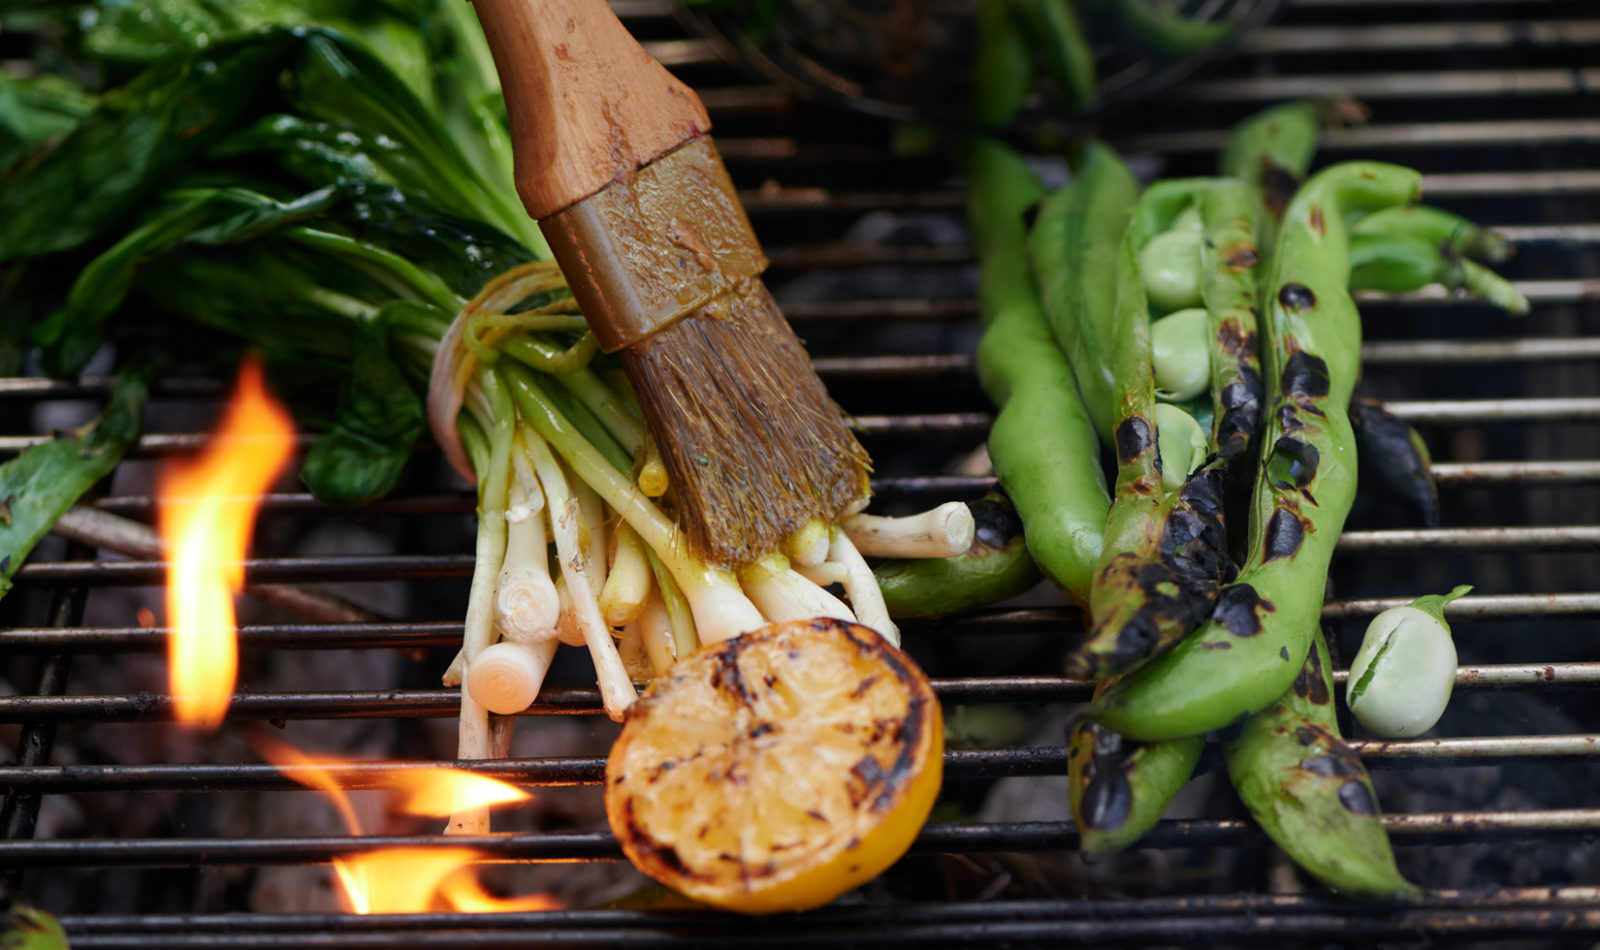 Green vegetables on a grill being brushed with oil